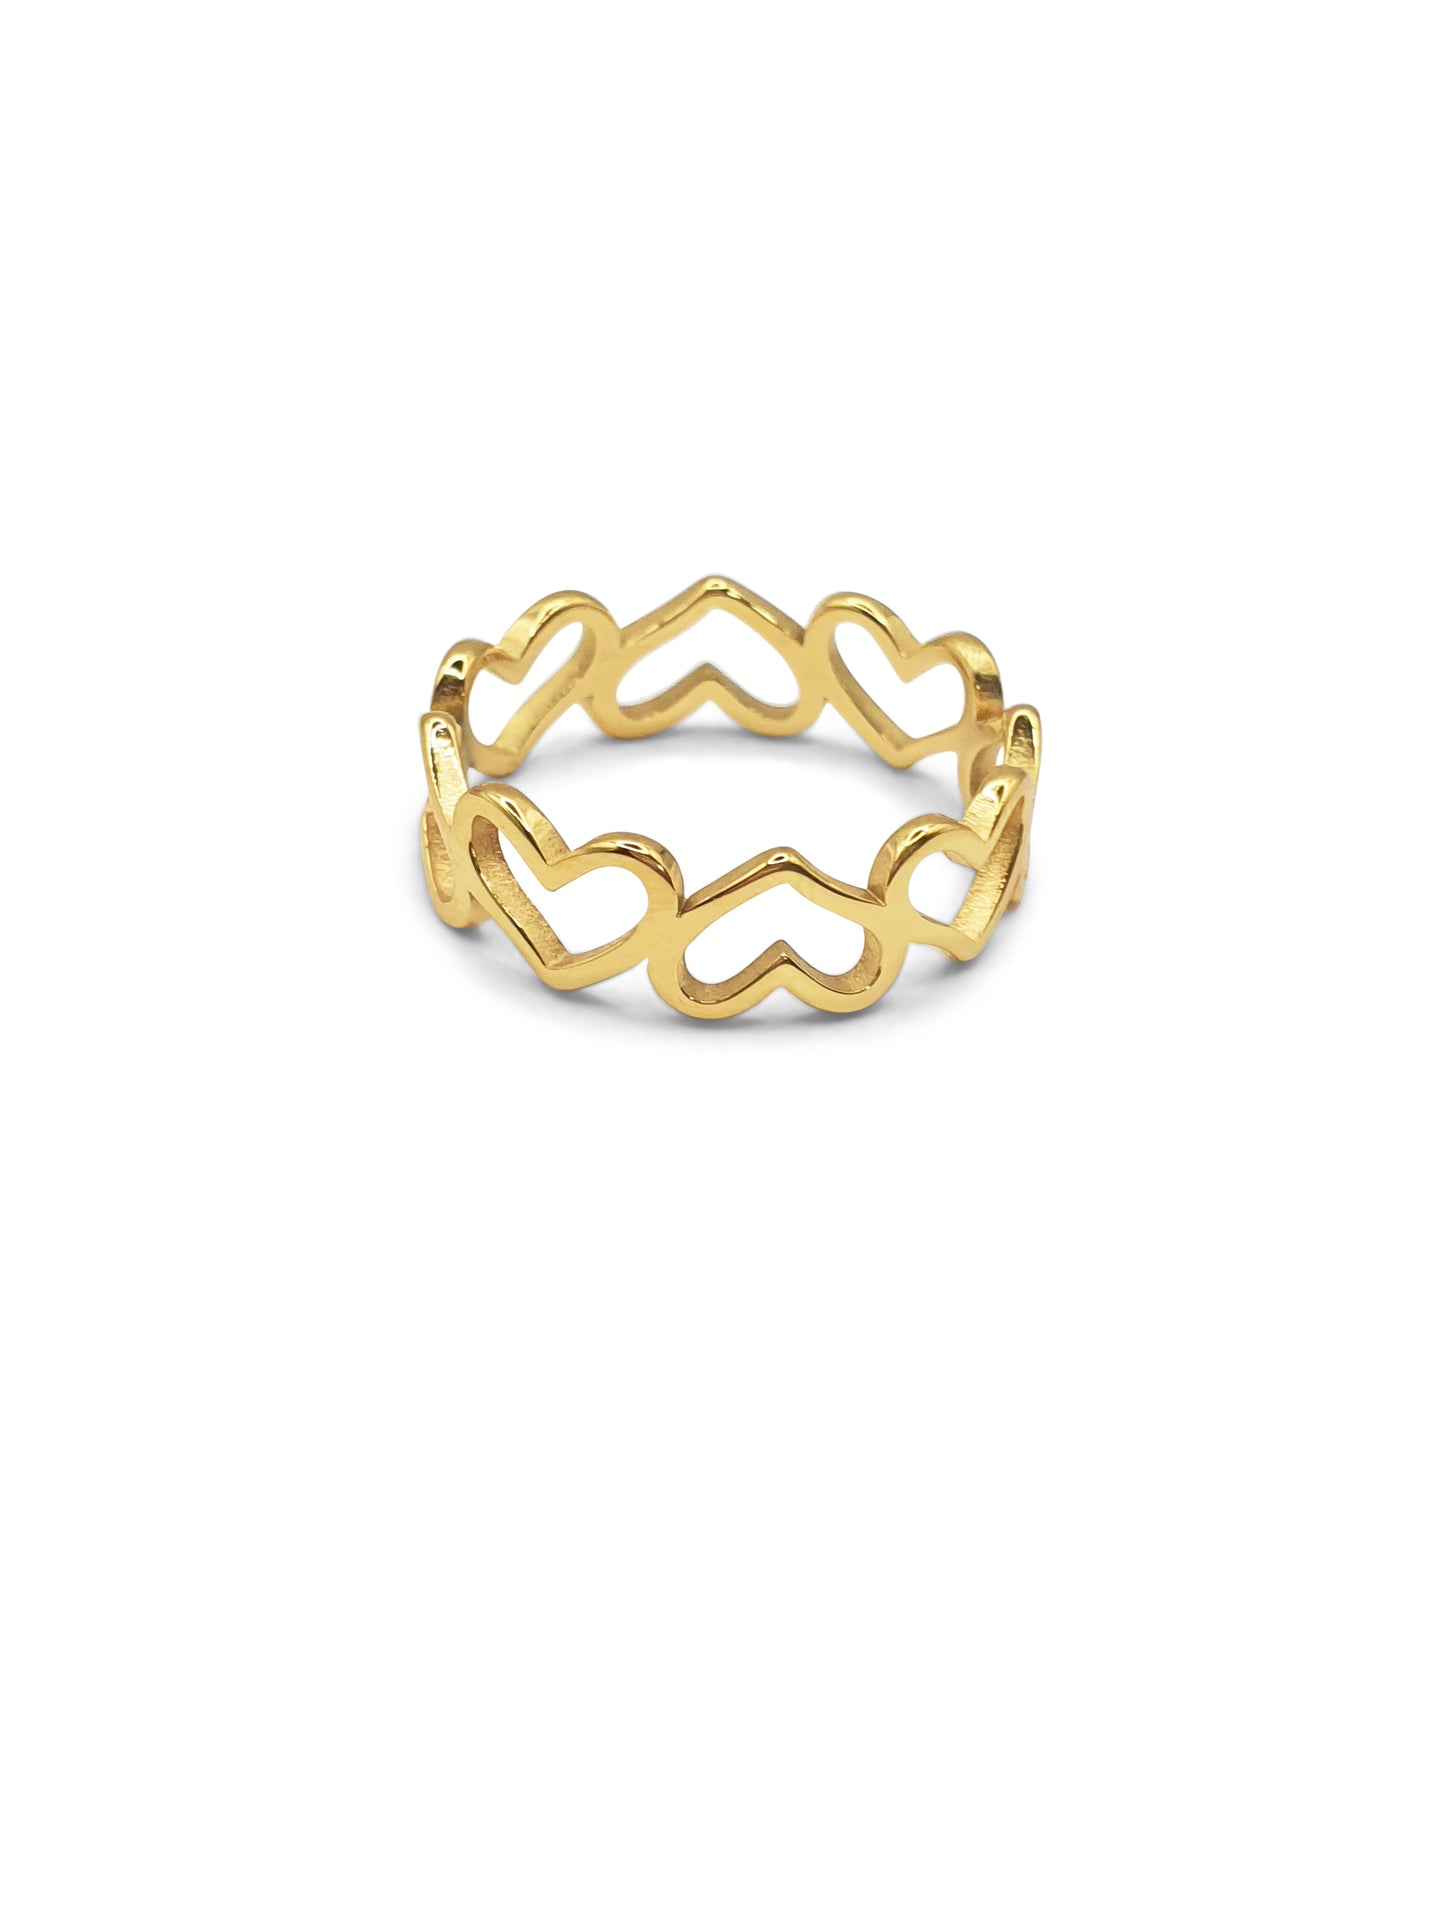 A gold ring made up of connected stencil hearts against a white background